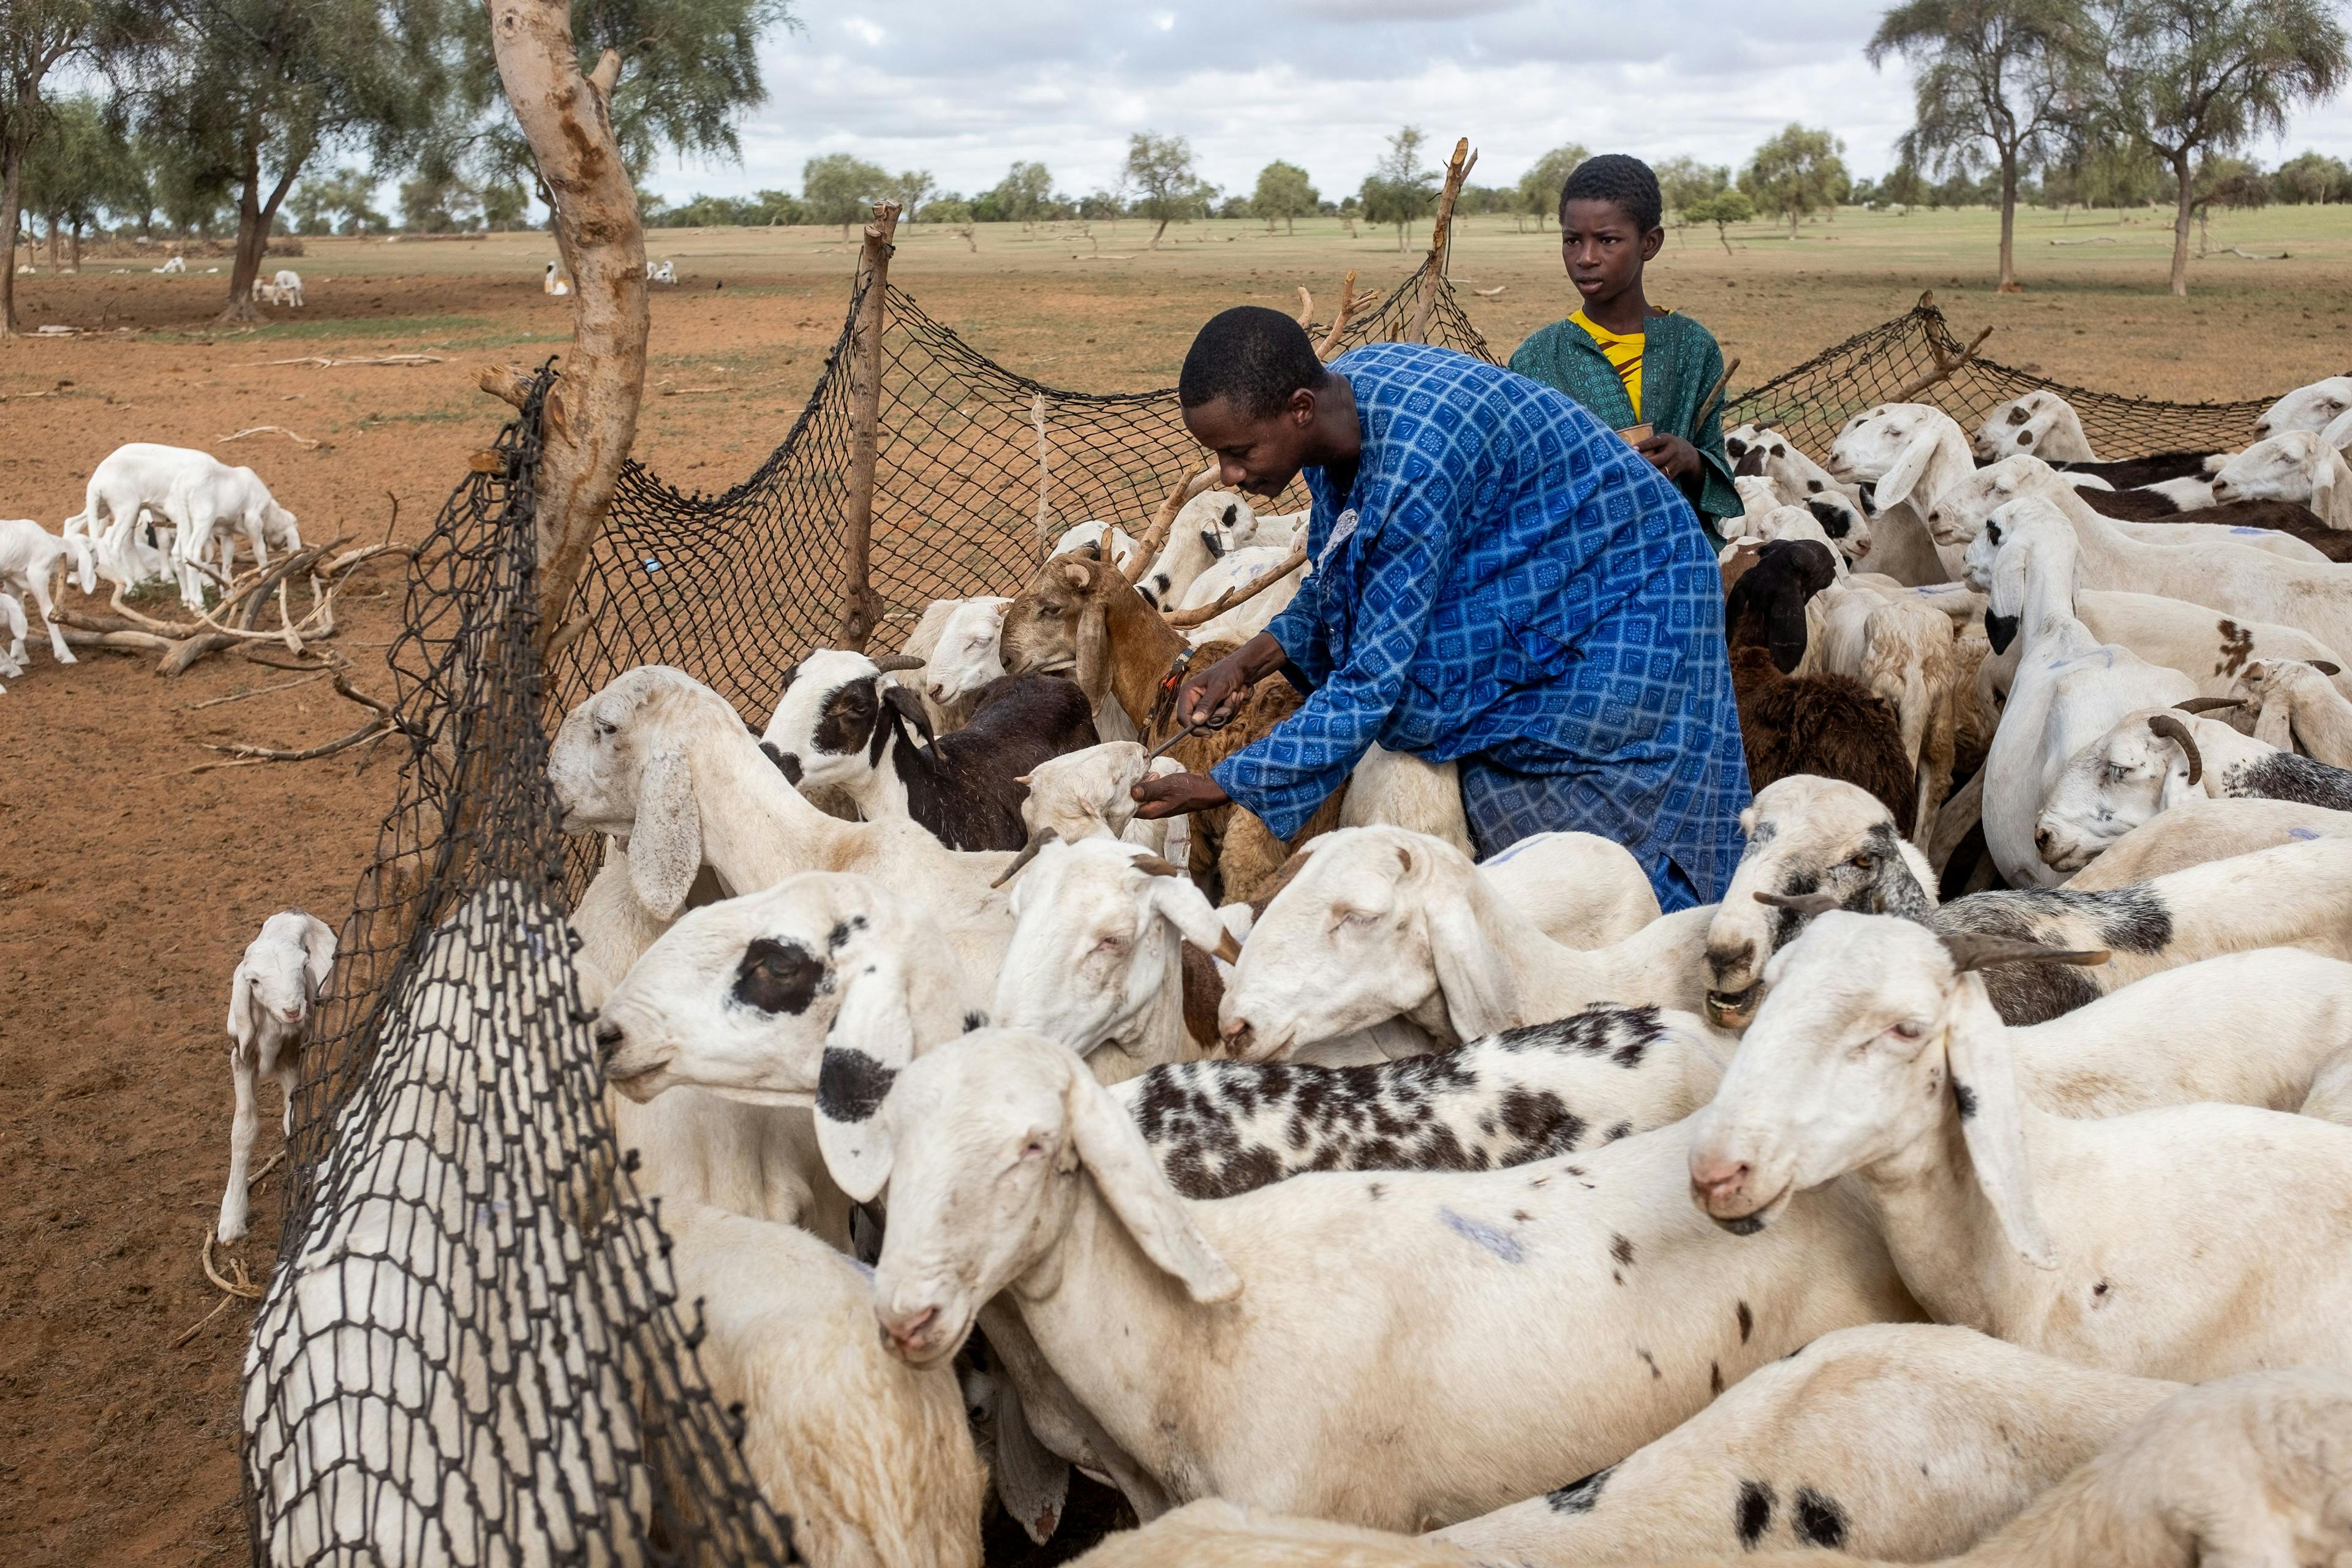 Every three months, Fulani herders check their flocks for sickly animals, and treat them for common parasites and diseases. Pastoralists will have to cope with more livestock deaths and price shocks caused by diseases and heat stress.  